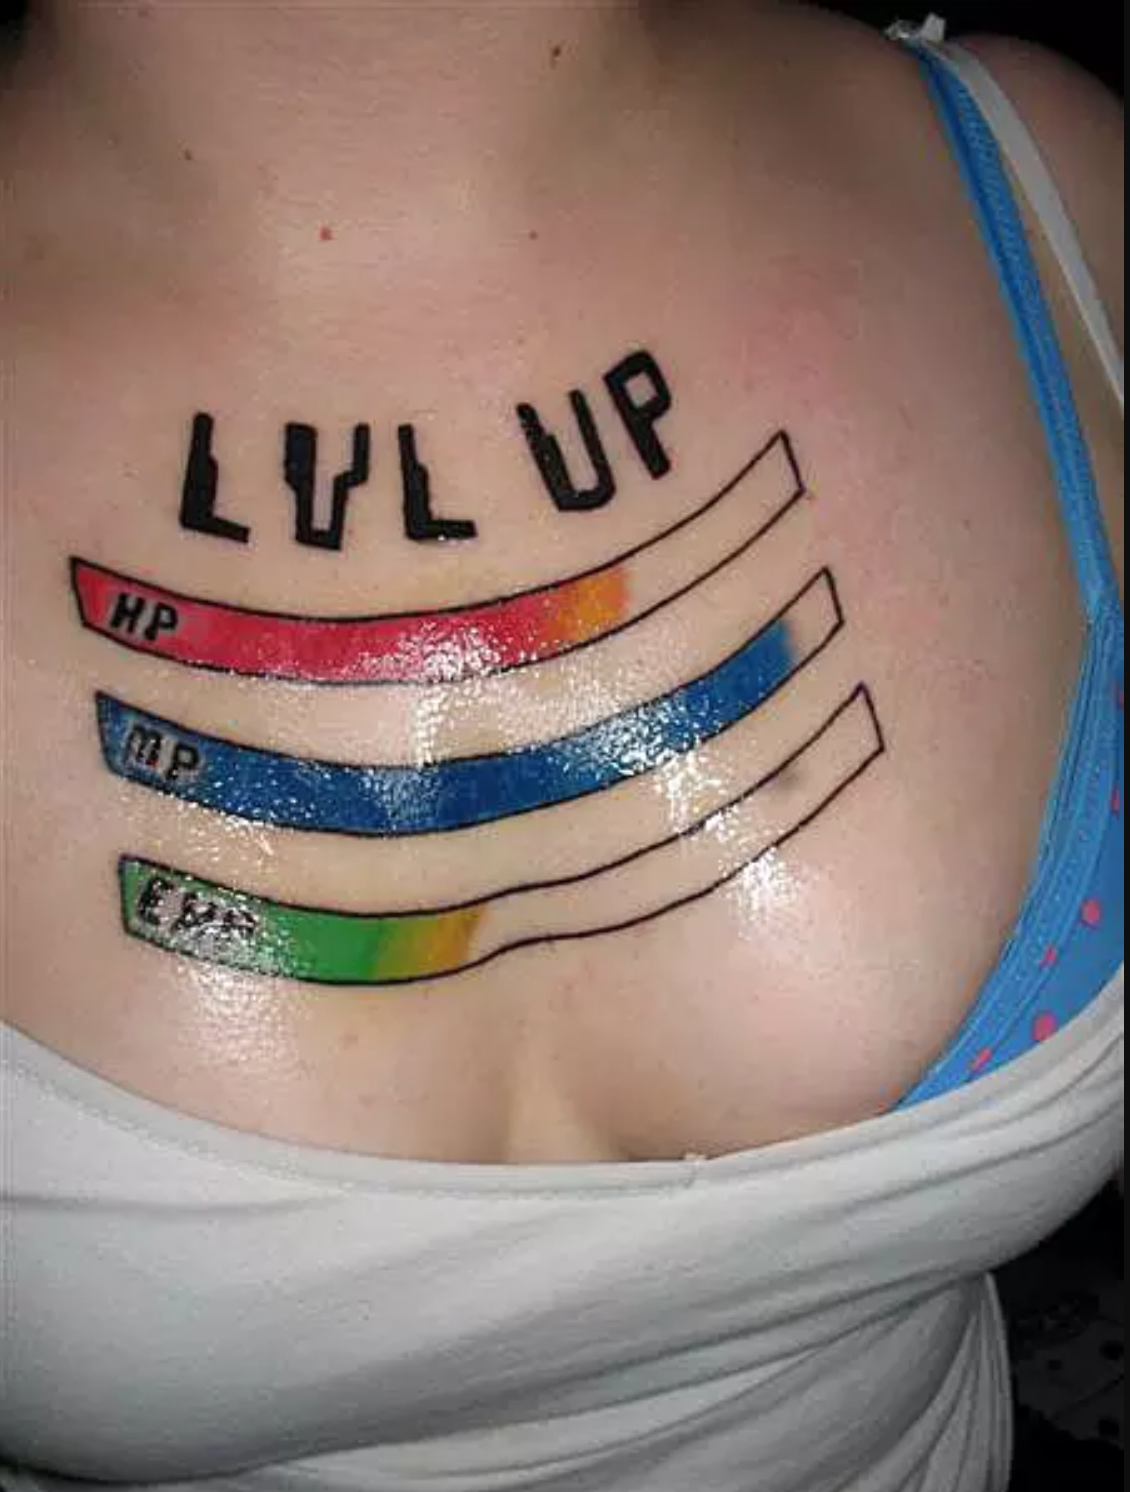 terrible gamer tattoos tattoos worst of the worst - Lvl Up Hp Cup